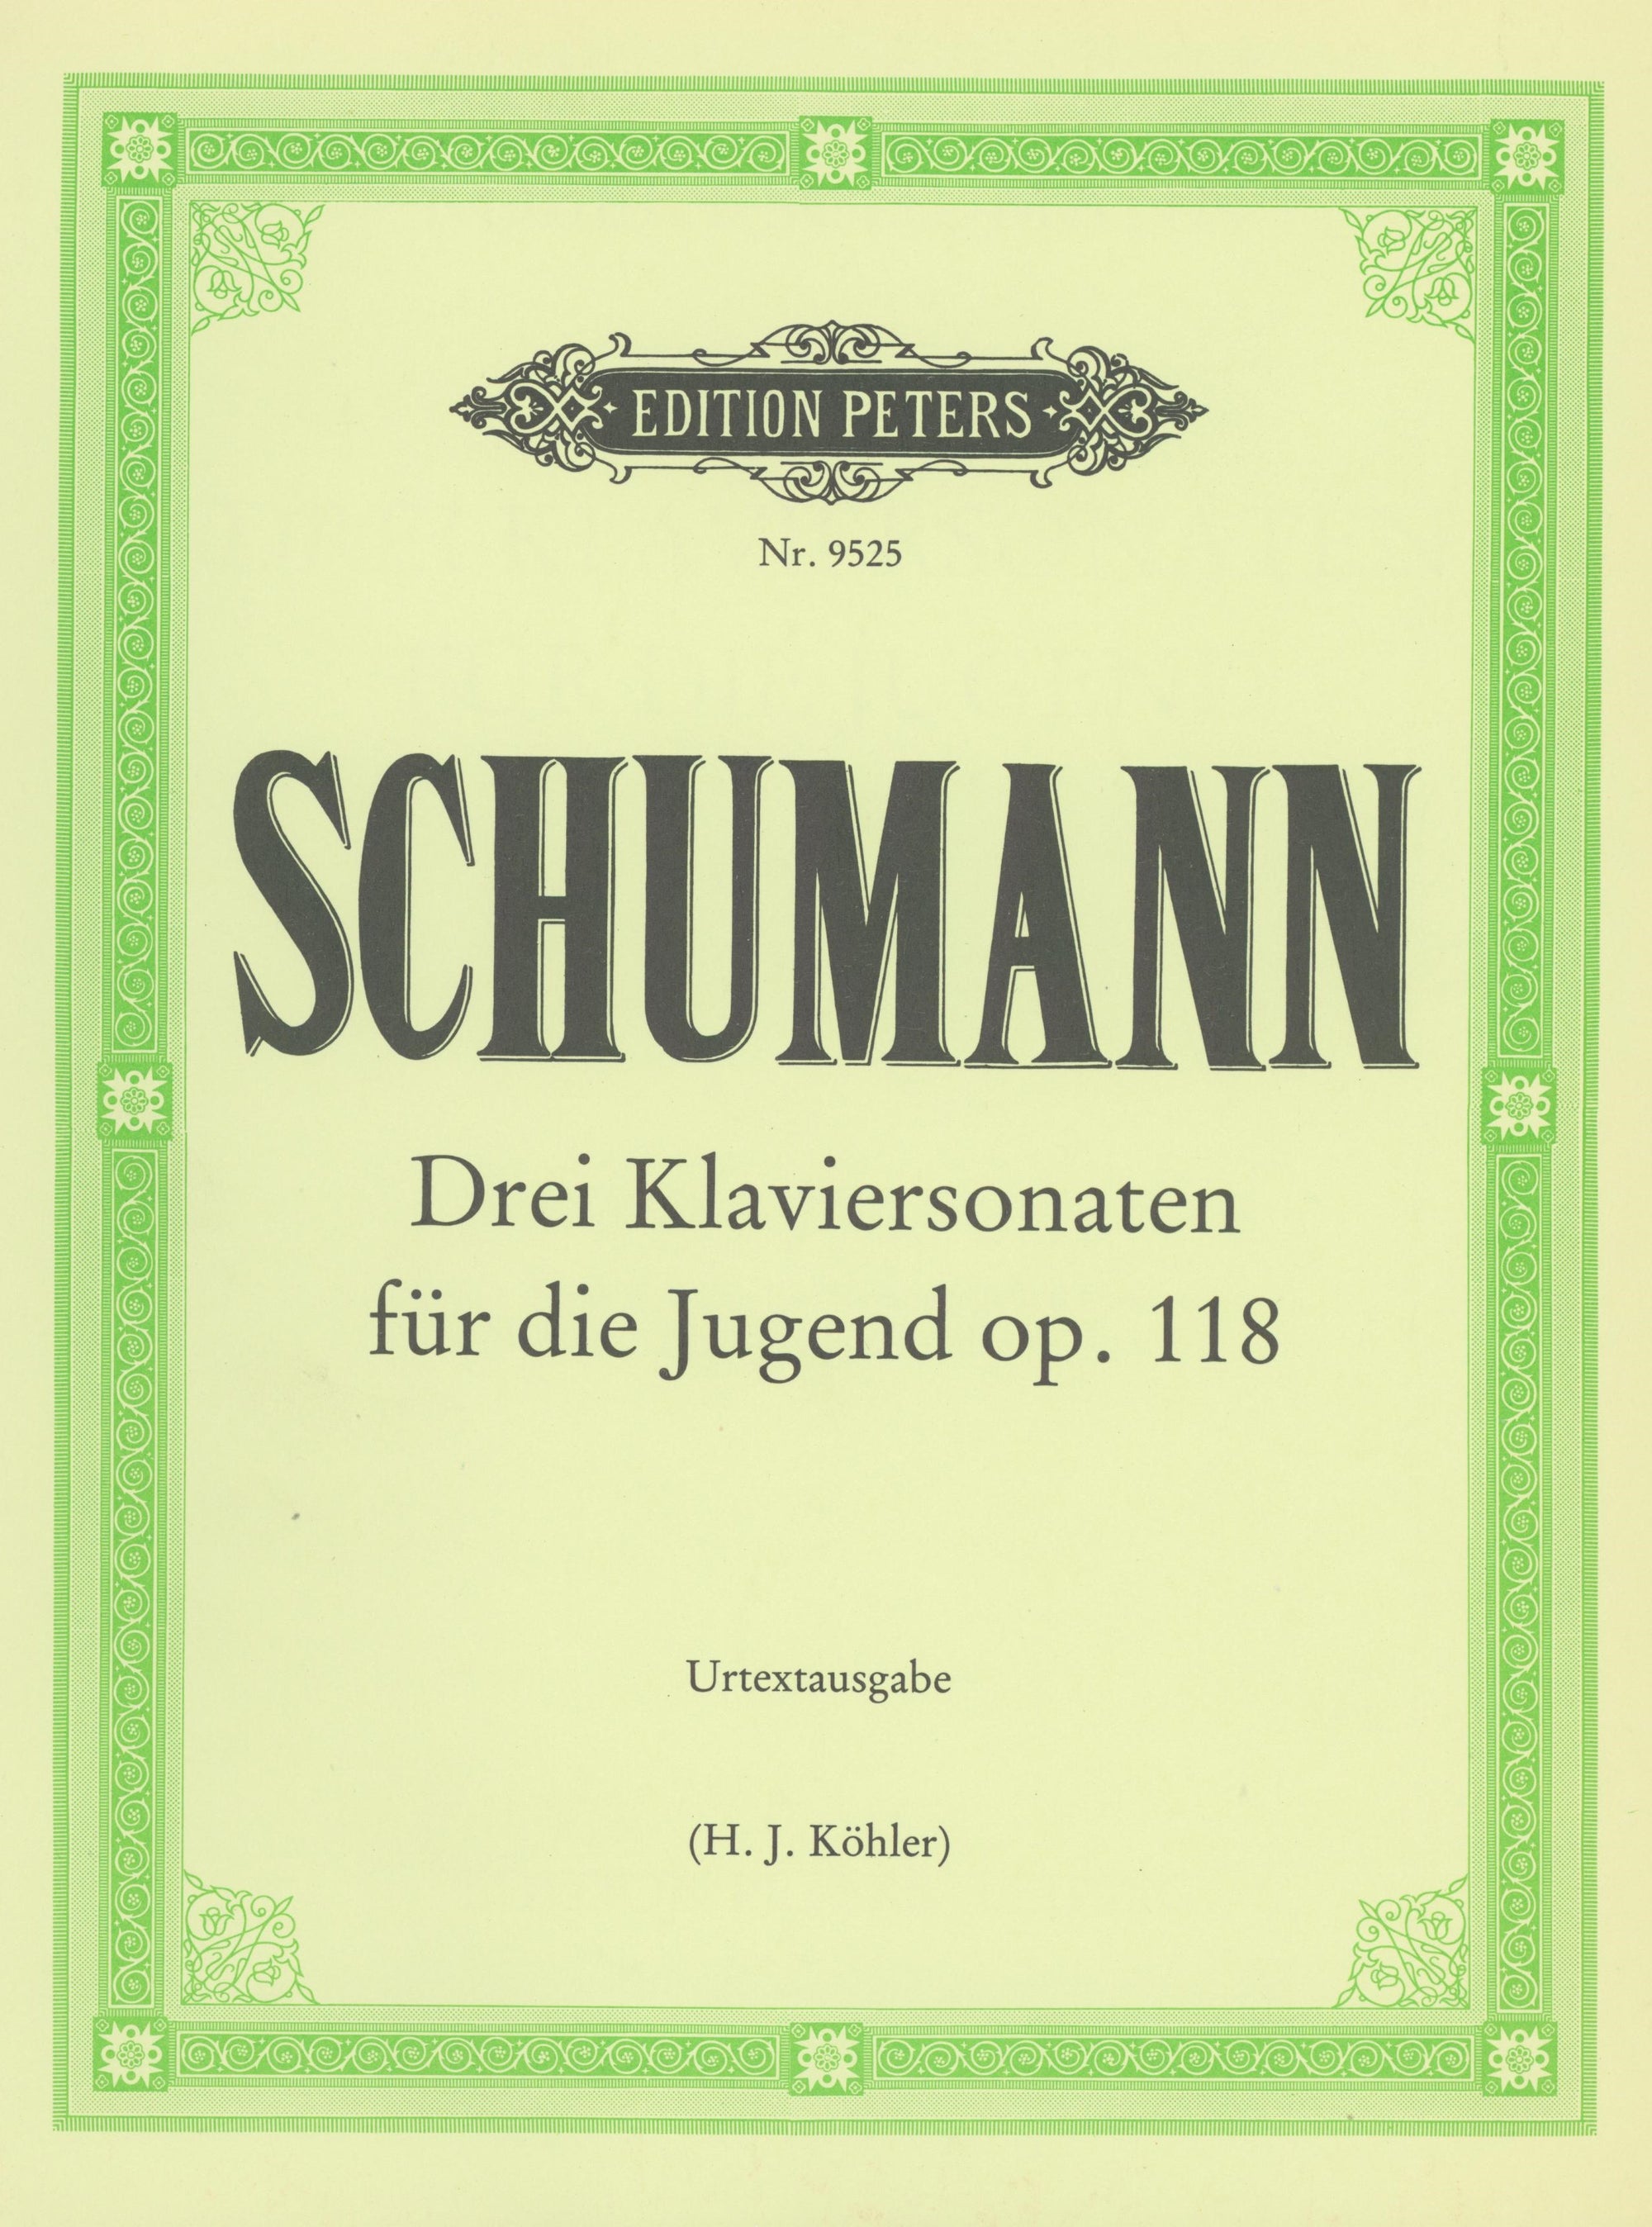 Schumann: 3 Piano Sonatas for the Young, Op. 118